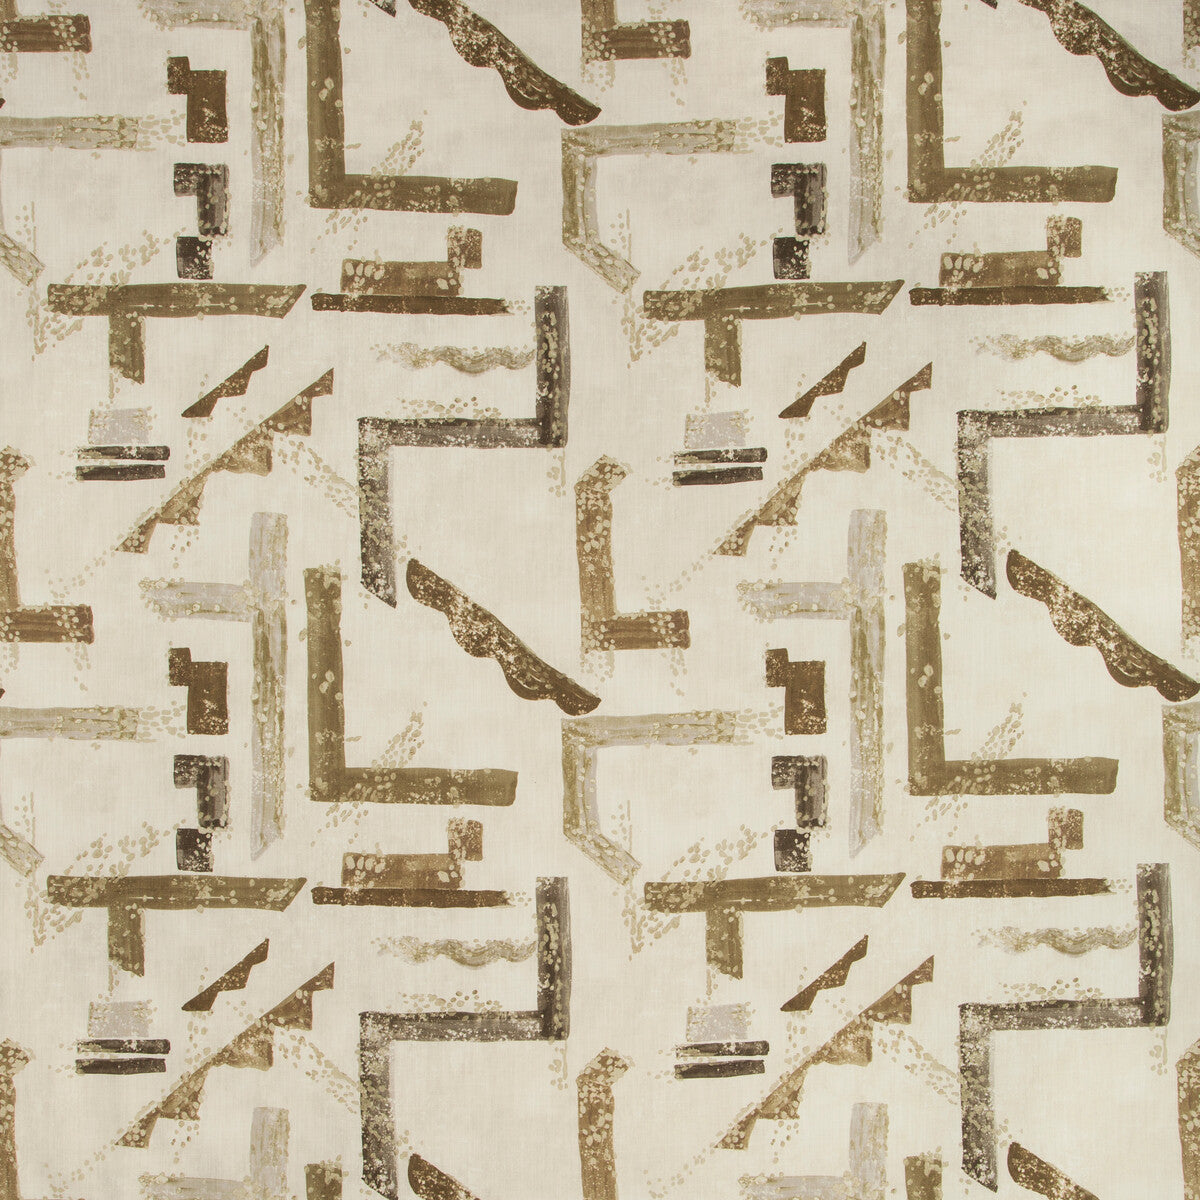 Dessau fabric in sparrow color - pattern DESSAU.416.0 - by Kravet Basics in the Nate Berkus Well-Traveled collection